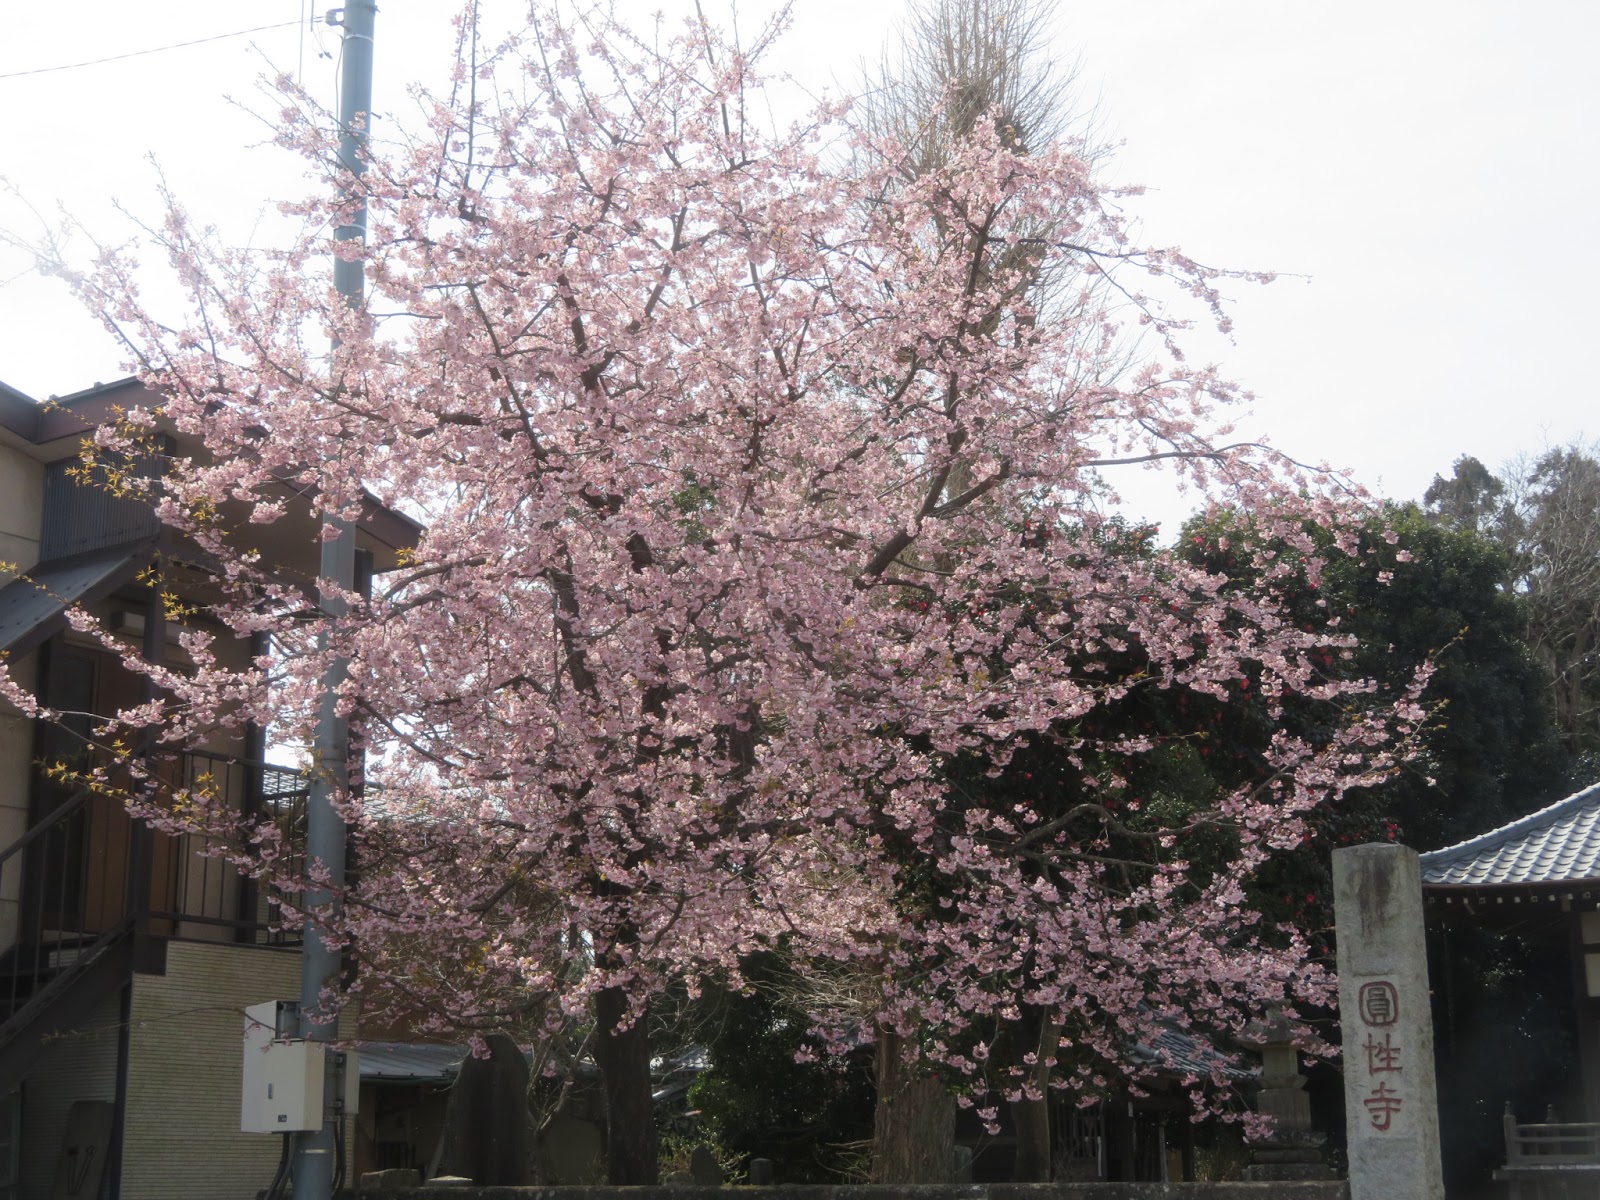 Nabe's factory: 一番の桜